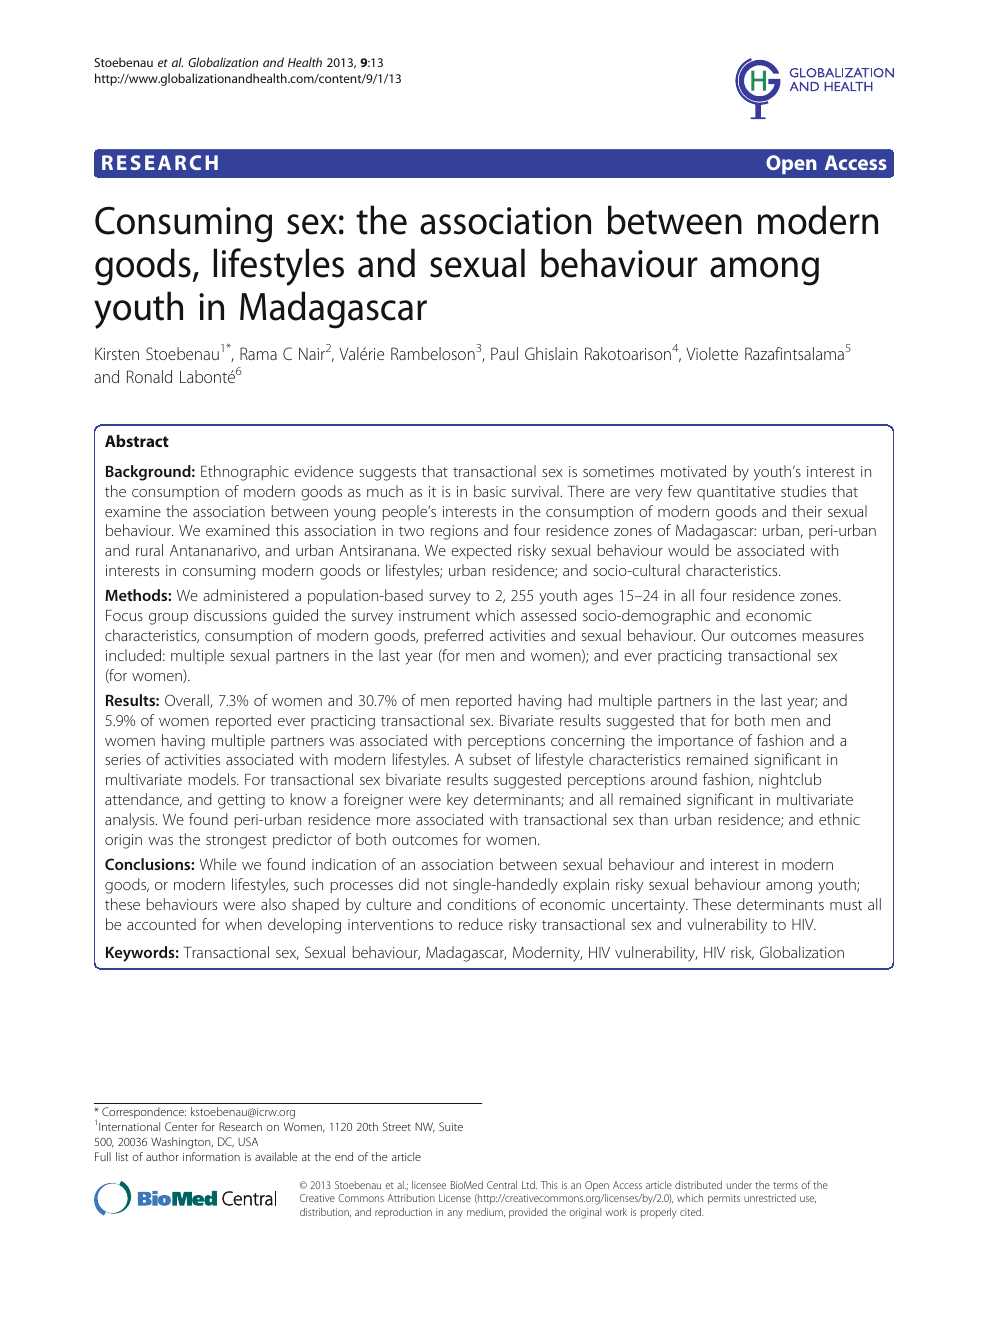 Consuming sex: the association between modern goods, lifestyles and sexual  behaviour among youth in Madagascar – topic of research paper in Sociology.  Download scholarly article PDF and read for free on CyberLeninka